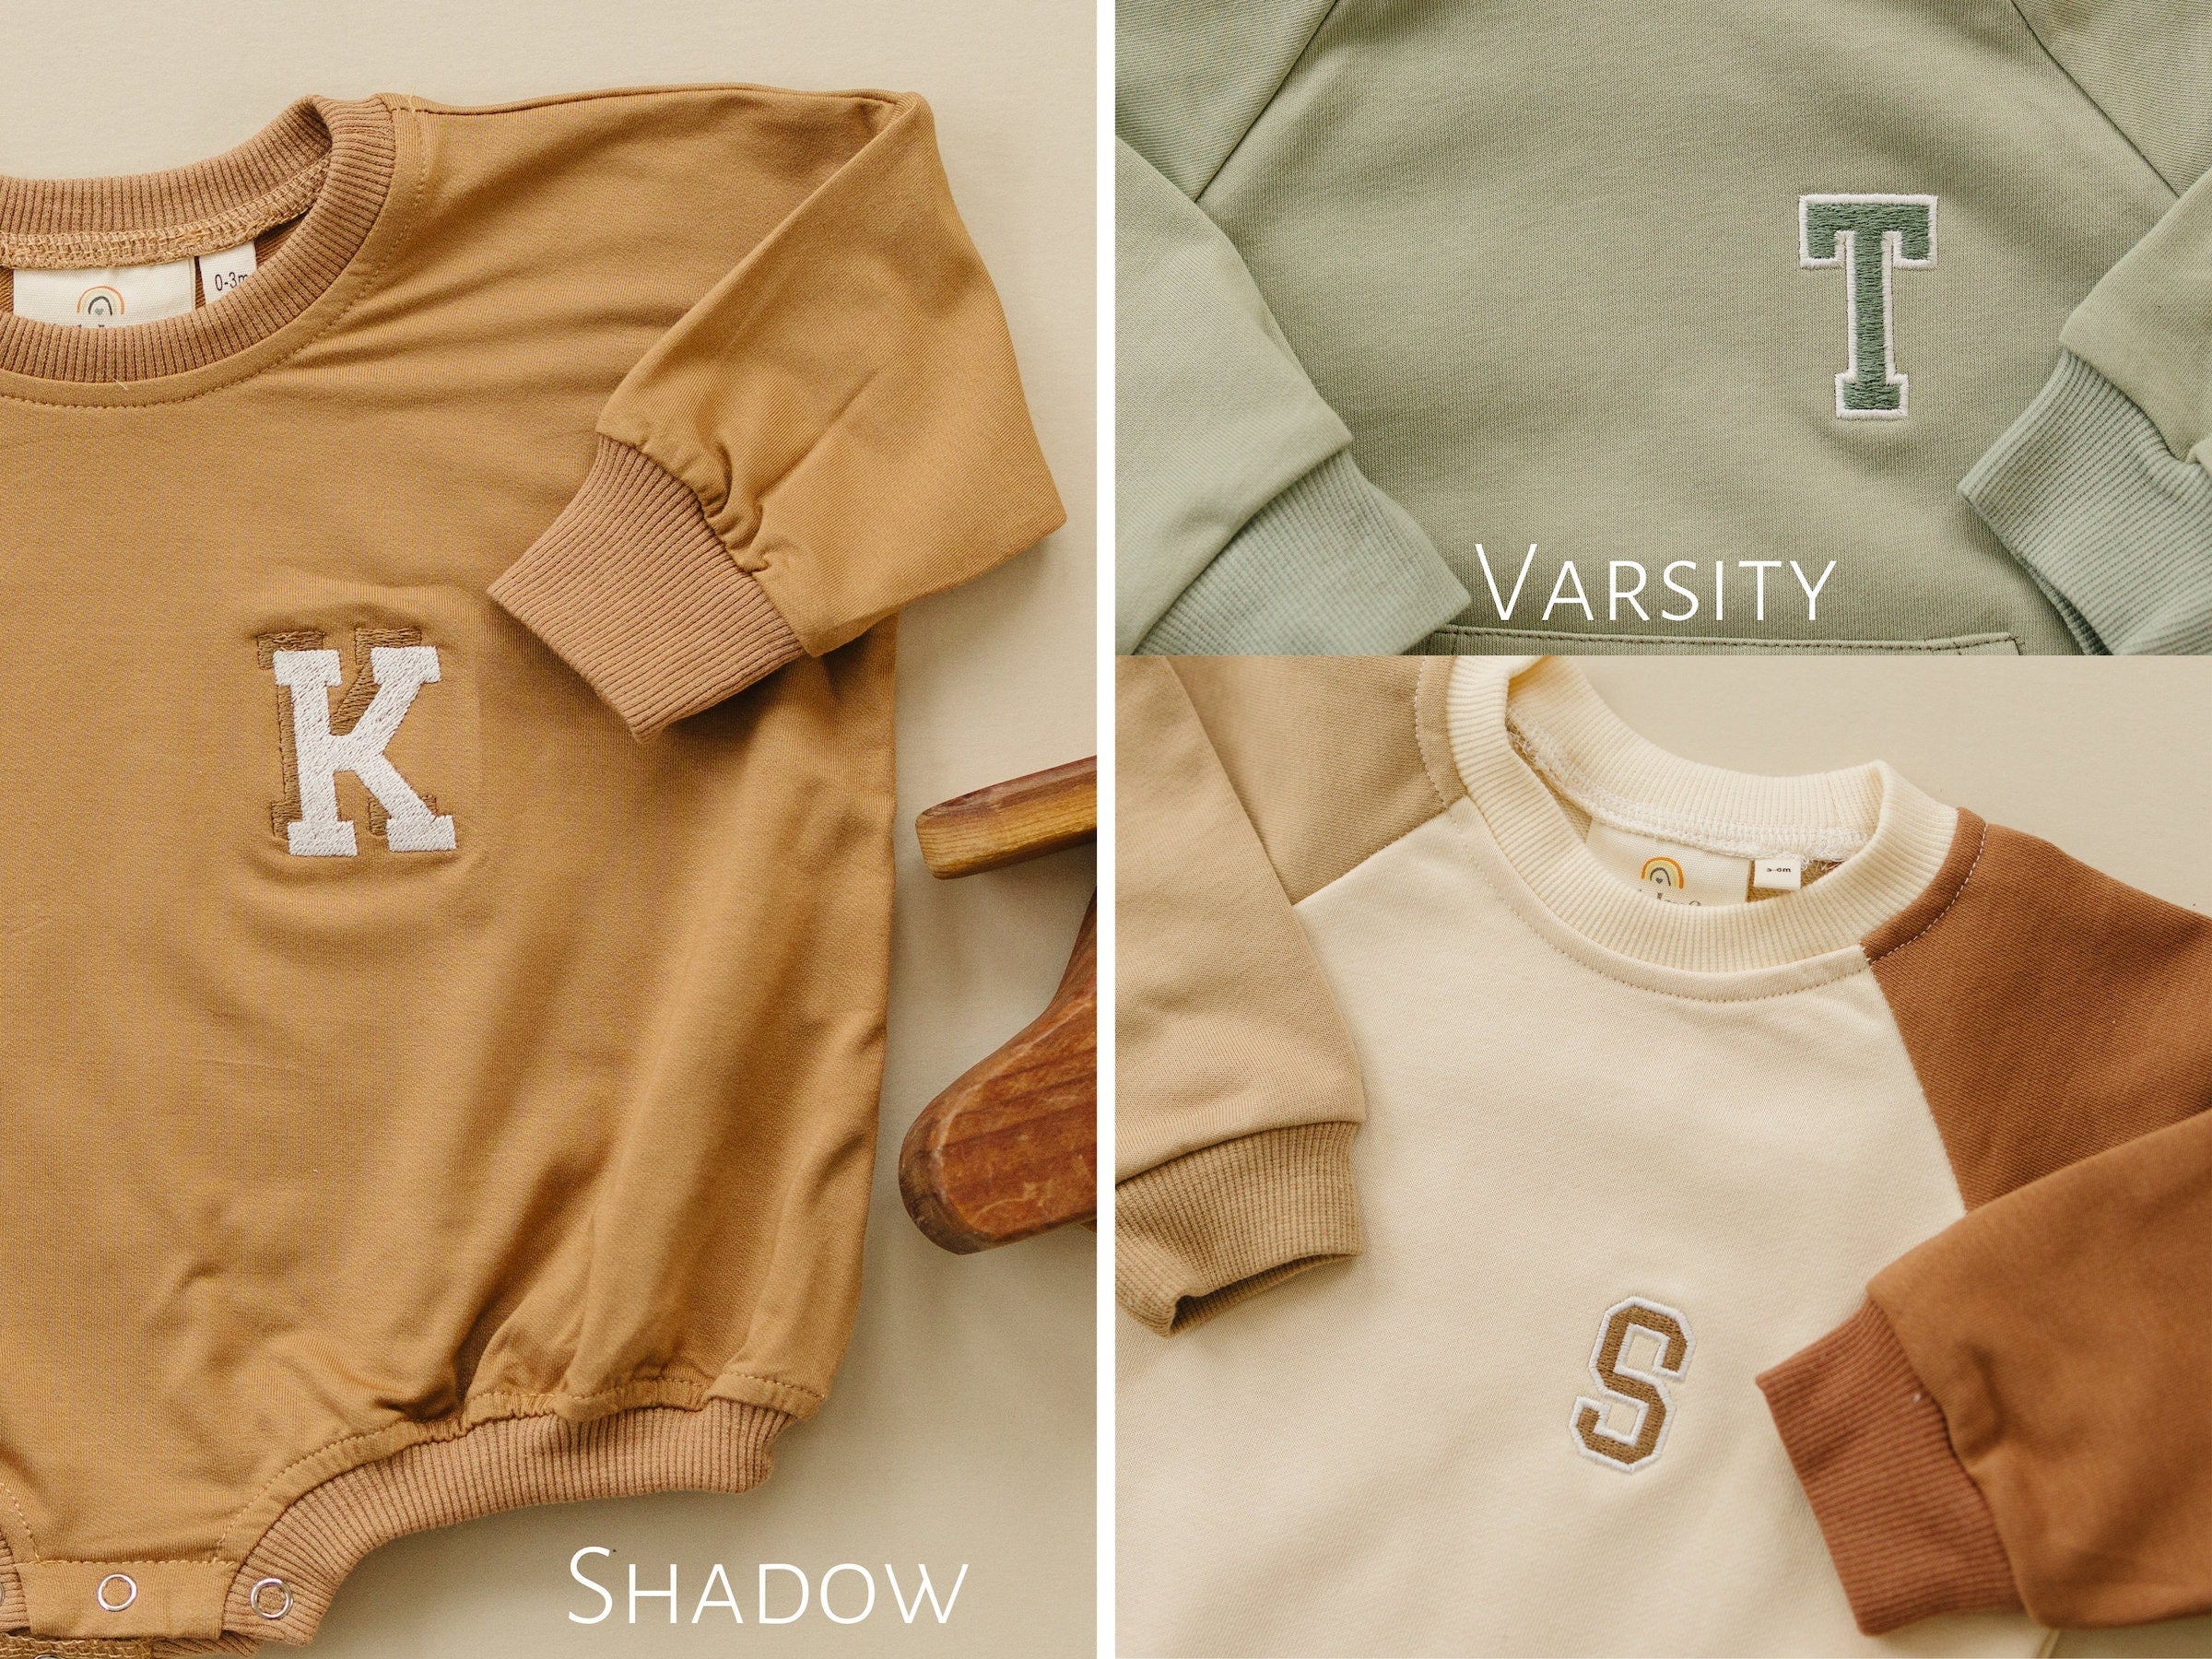 Embroidered Crewneck Sweatshirt - Personalized Crew Neck Sweatshirt - Custom Name Sweatshirt - Varsity Letter Embroidery Name - Baby Toddler